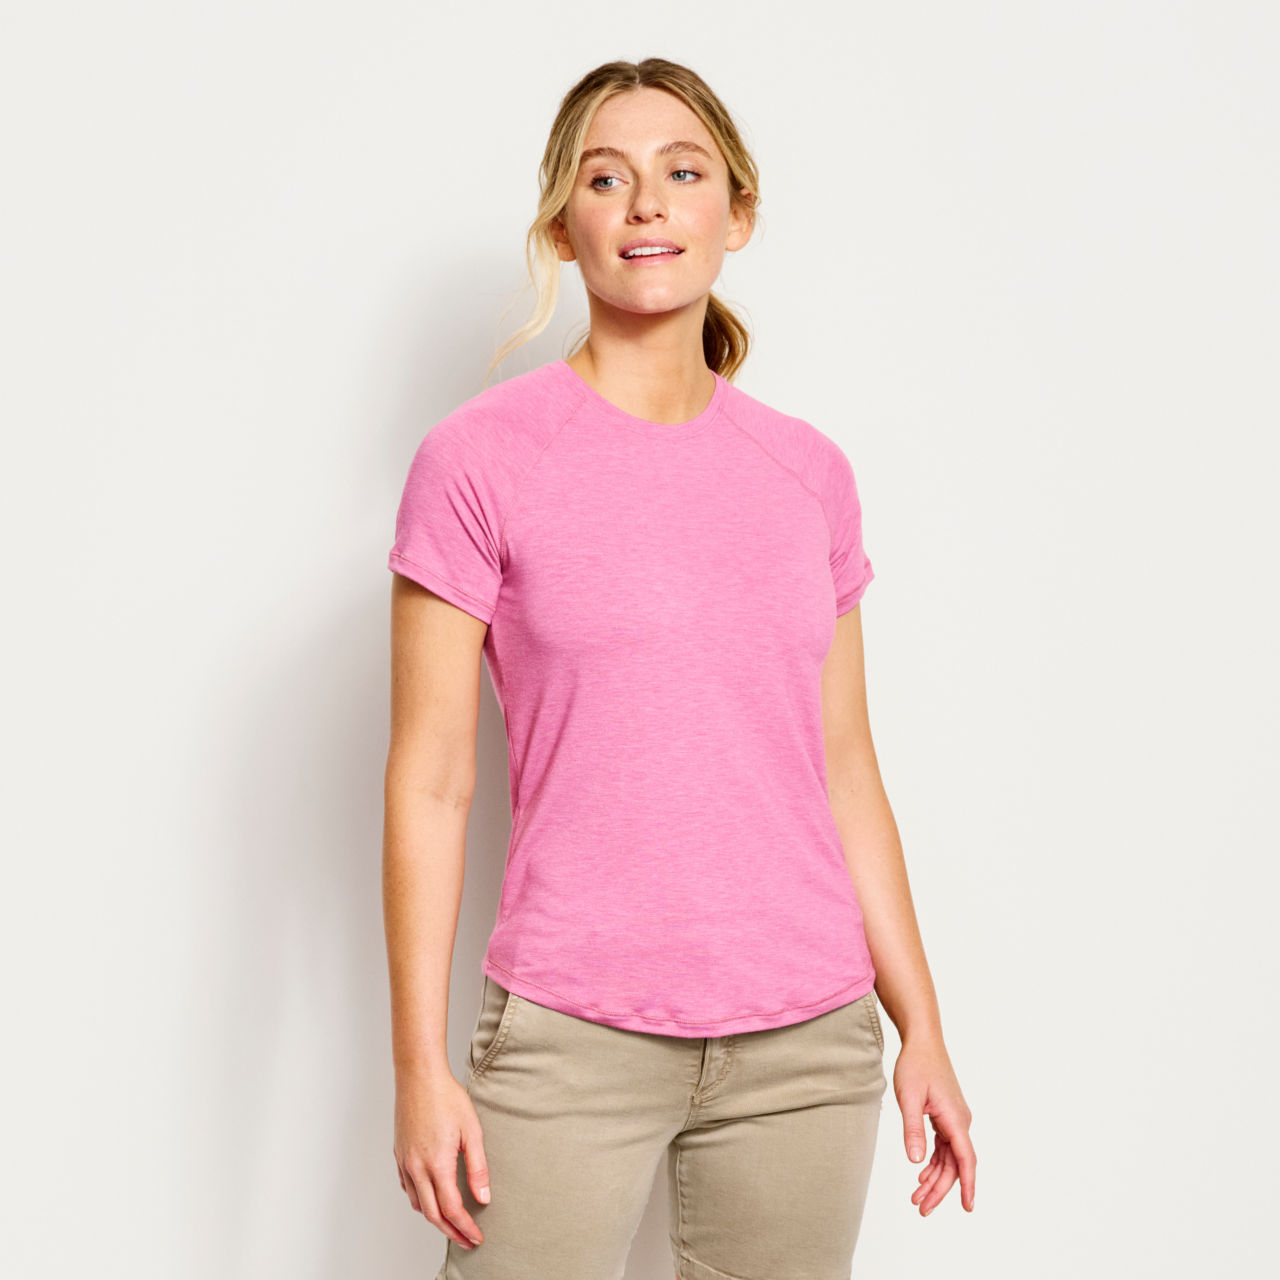 Women's DriCast™ Short-Sleeved Tee - PUNCH image number 0